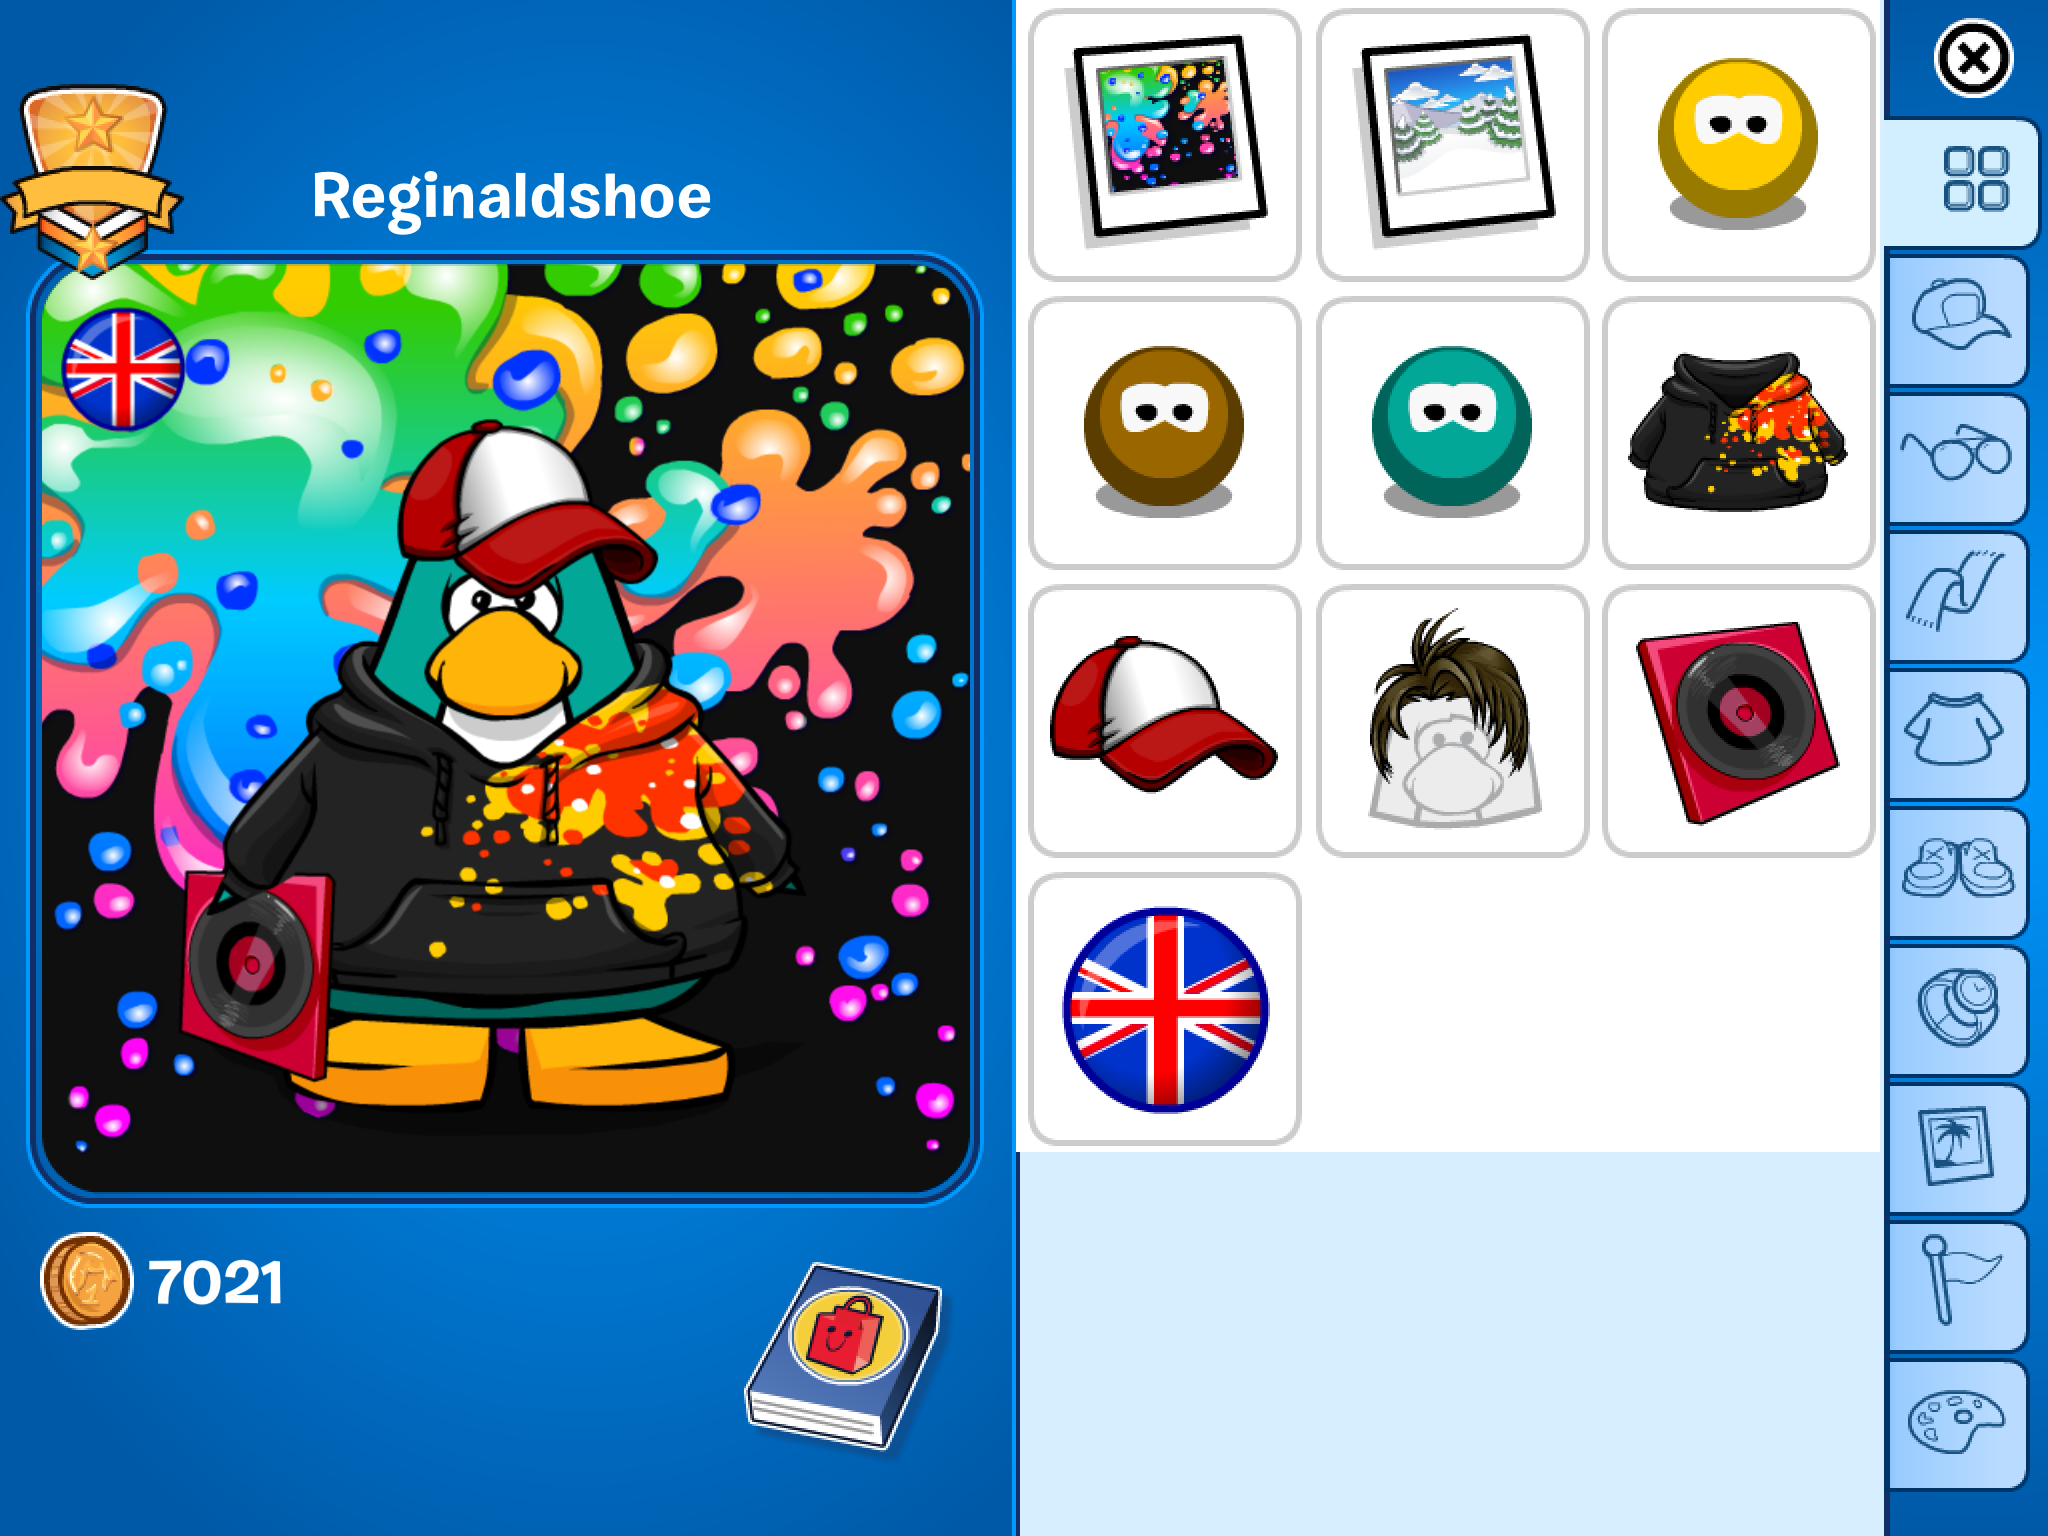 Club Penguin painting the background